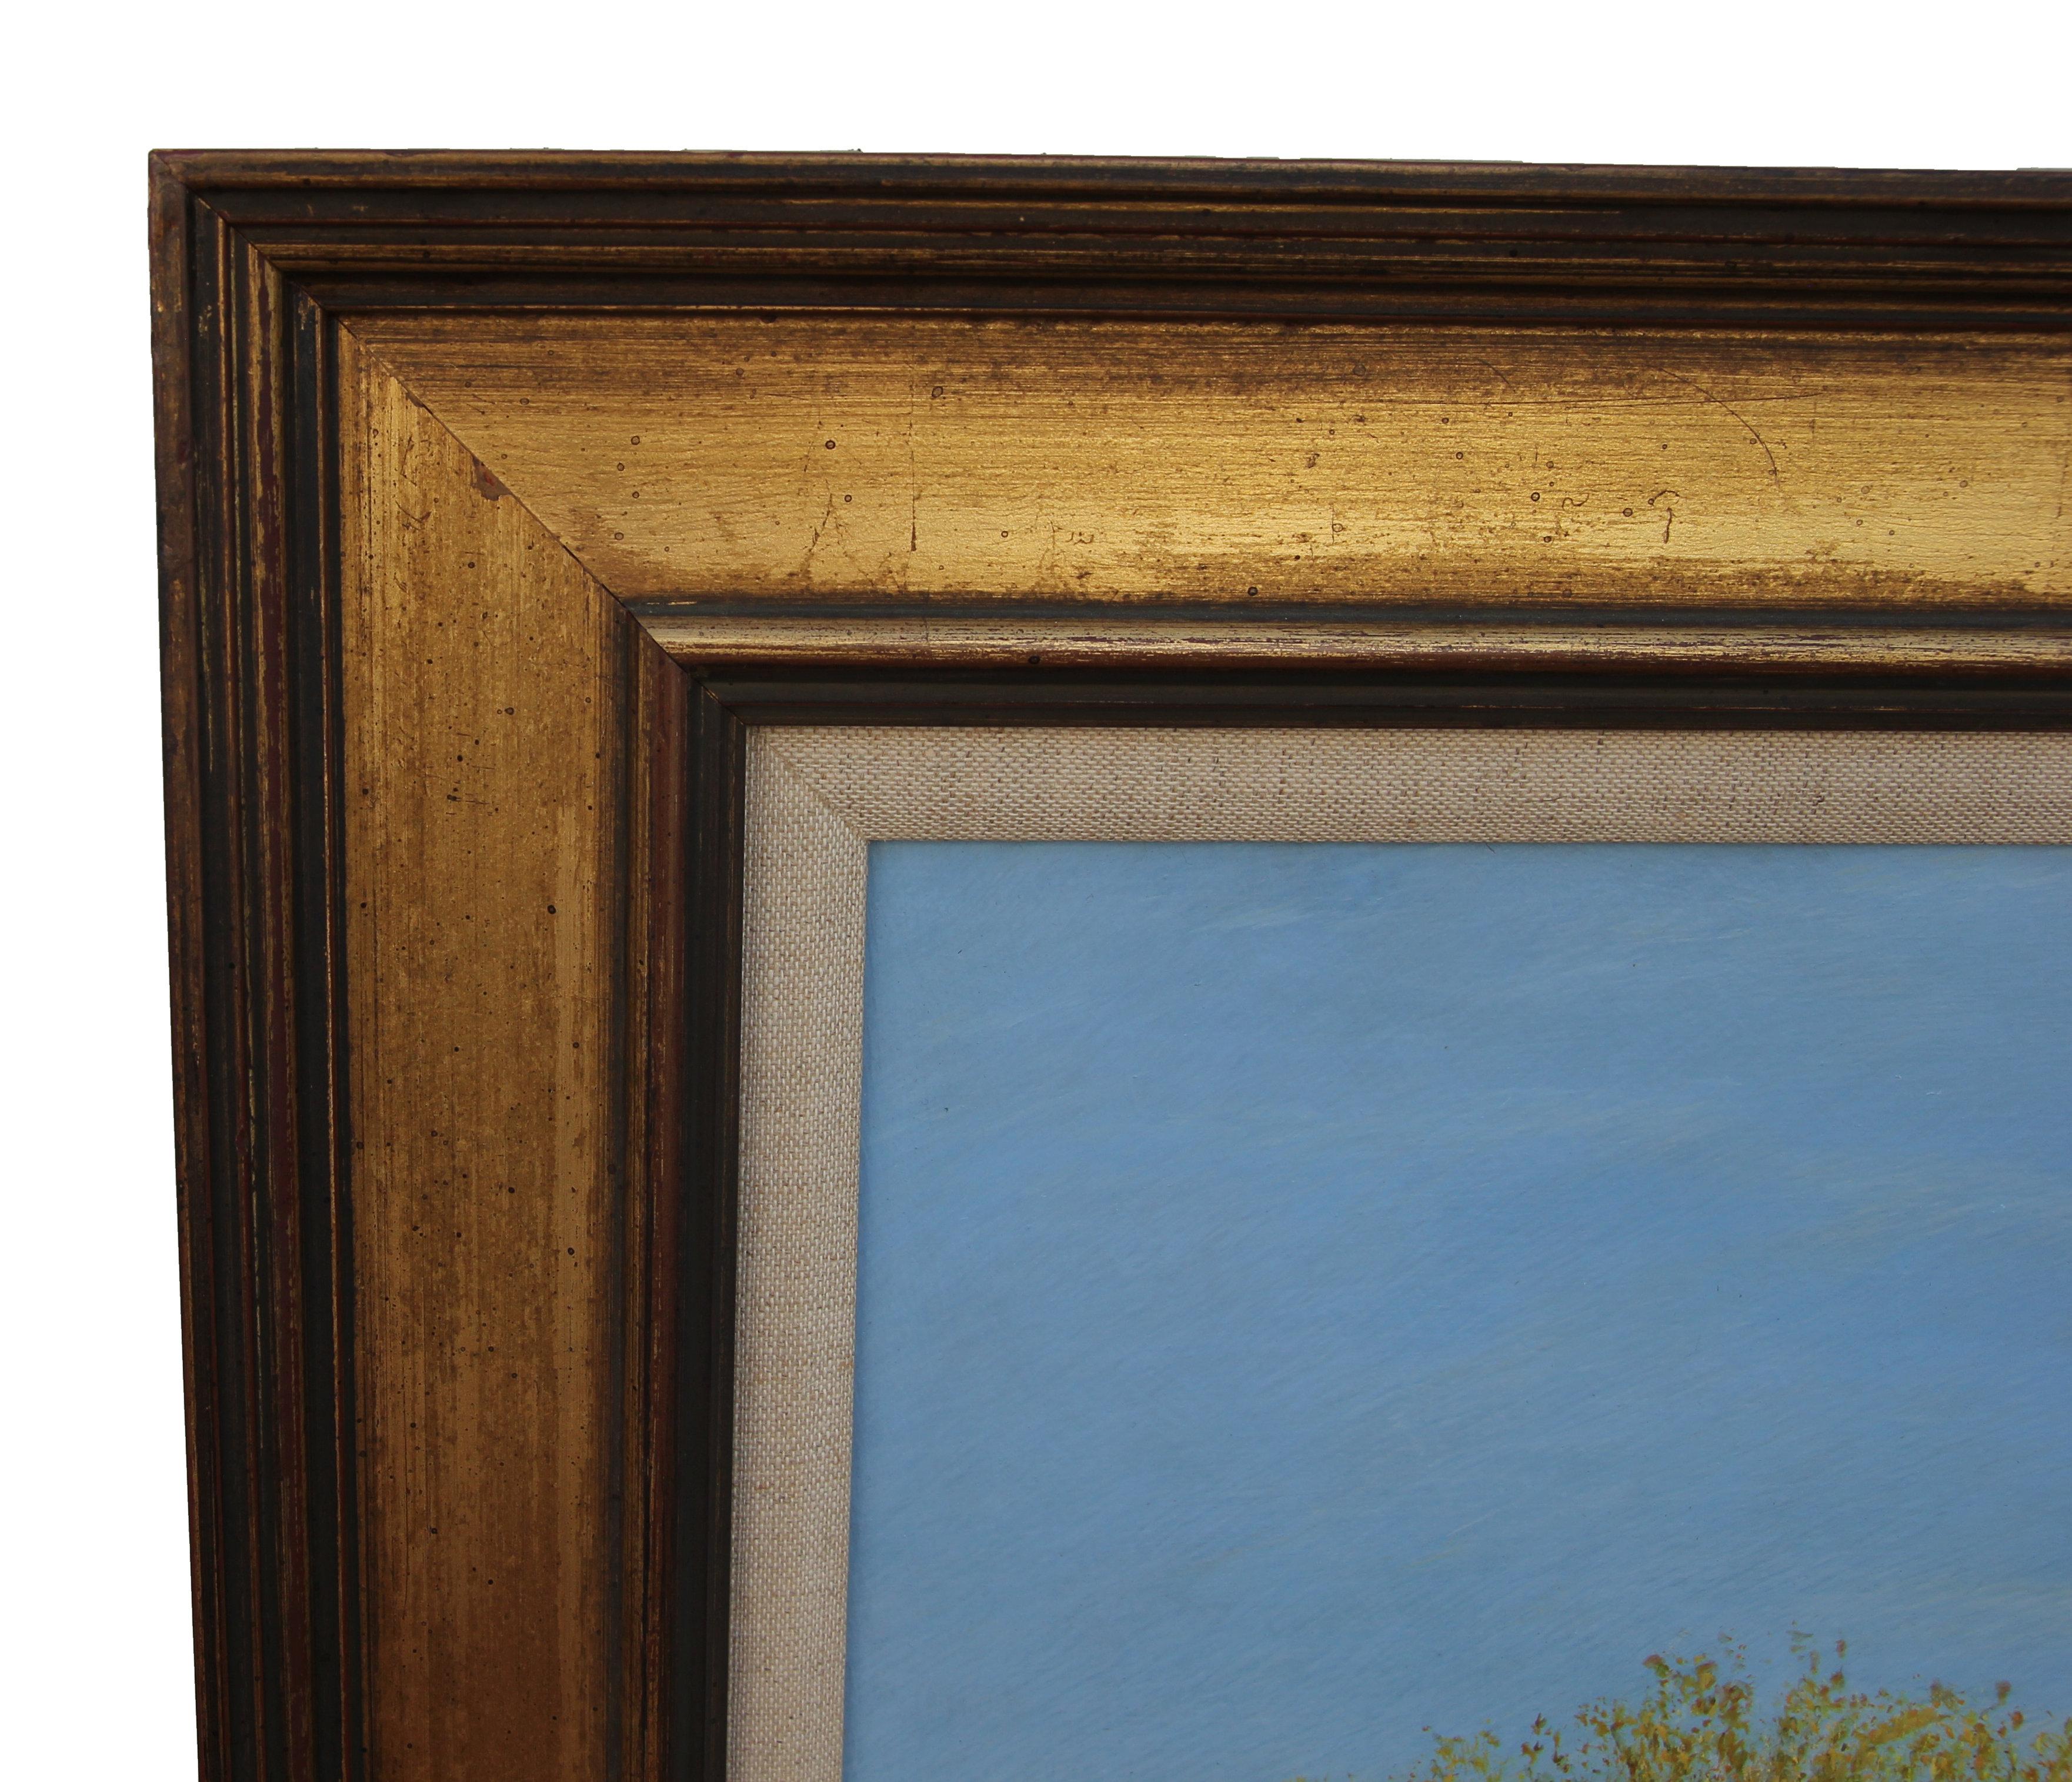 Naturalistic landscape painting of Texas. The painting is done in Anthony V. Martin's medium of choice, egg tempera. The work is signed by the artist in the bottom corner. It is framed in a gold frame.
Dimensions without Frame: H 33 in x W 23.5 in.